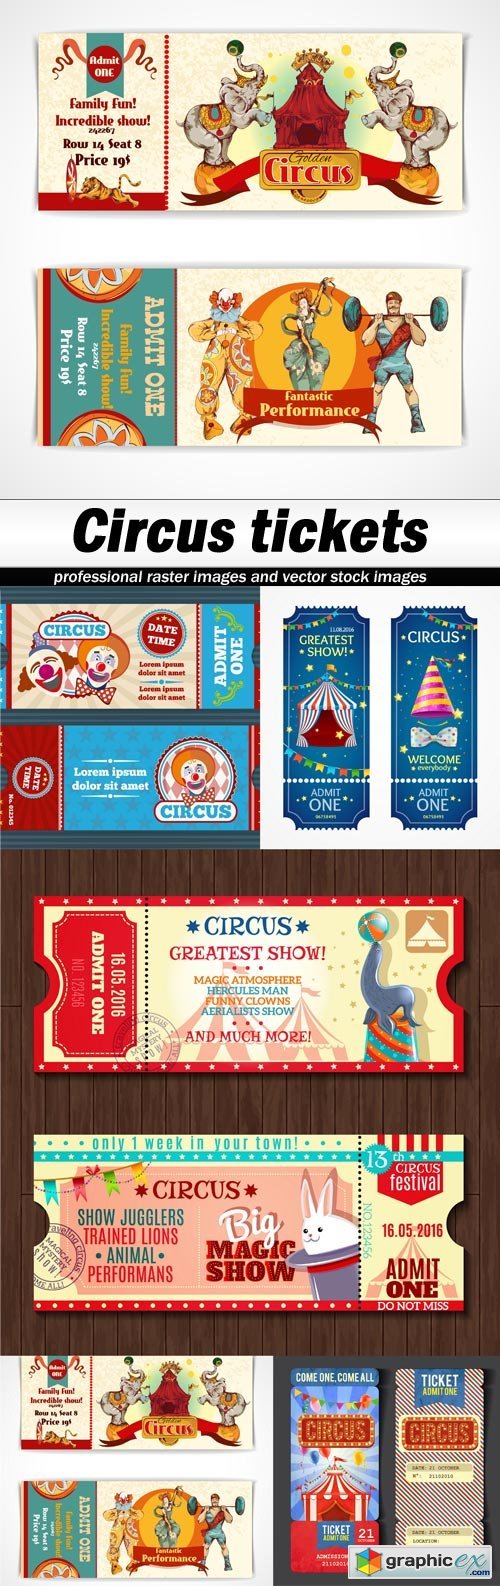 Circus tickets-5 EPS